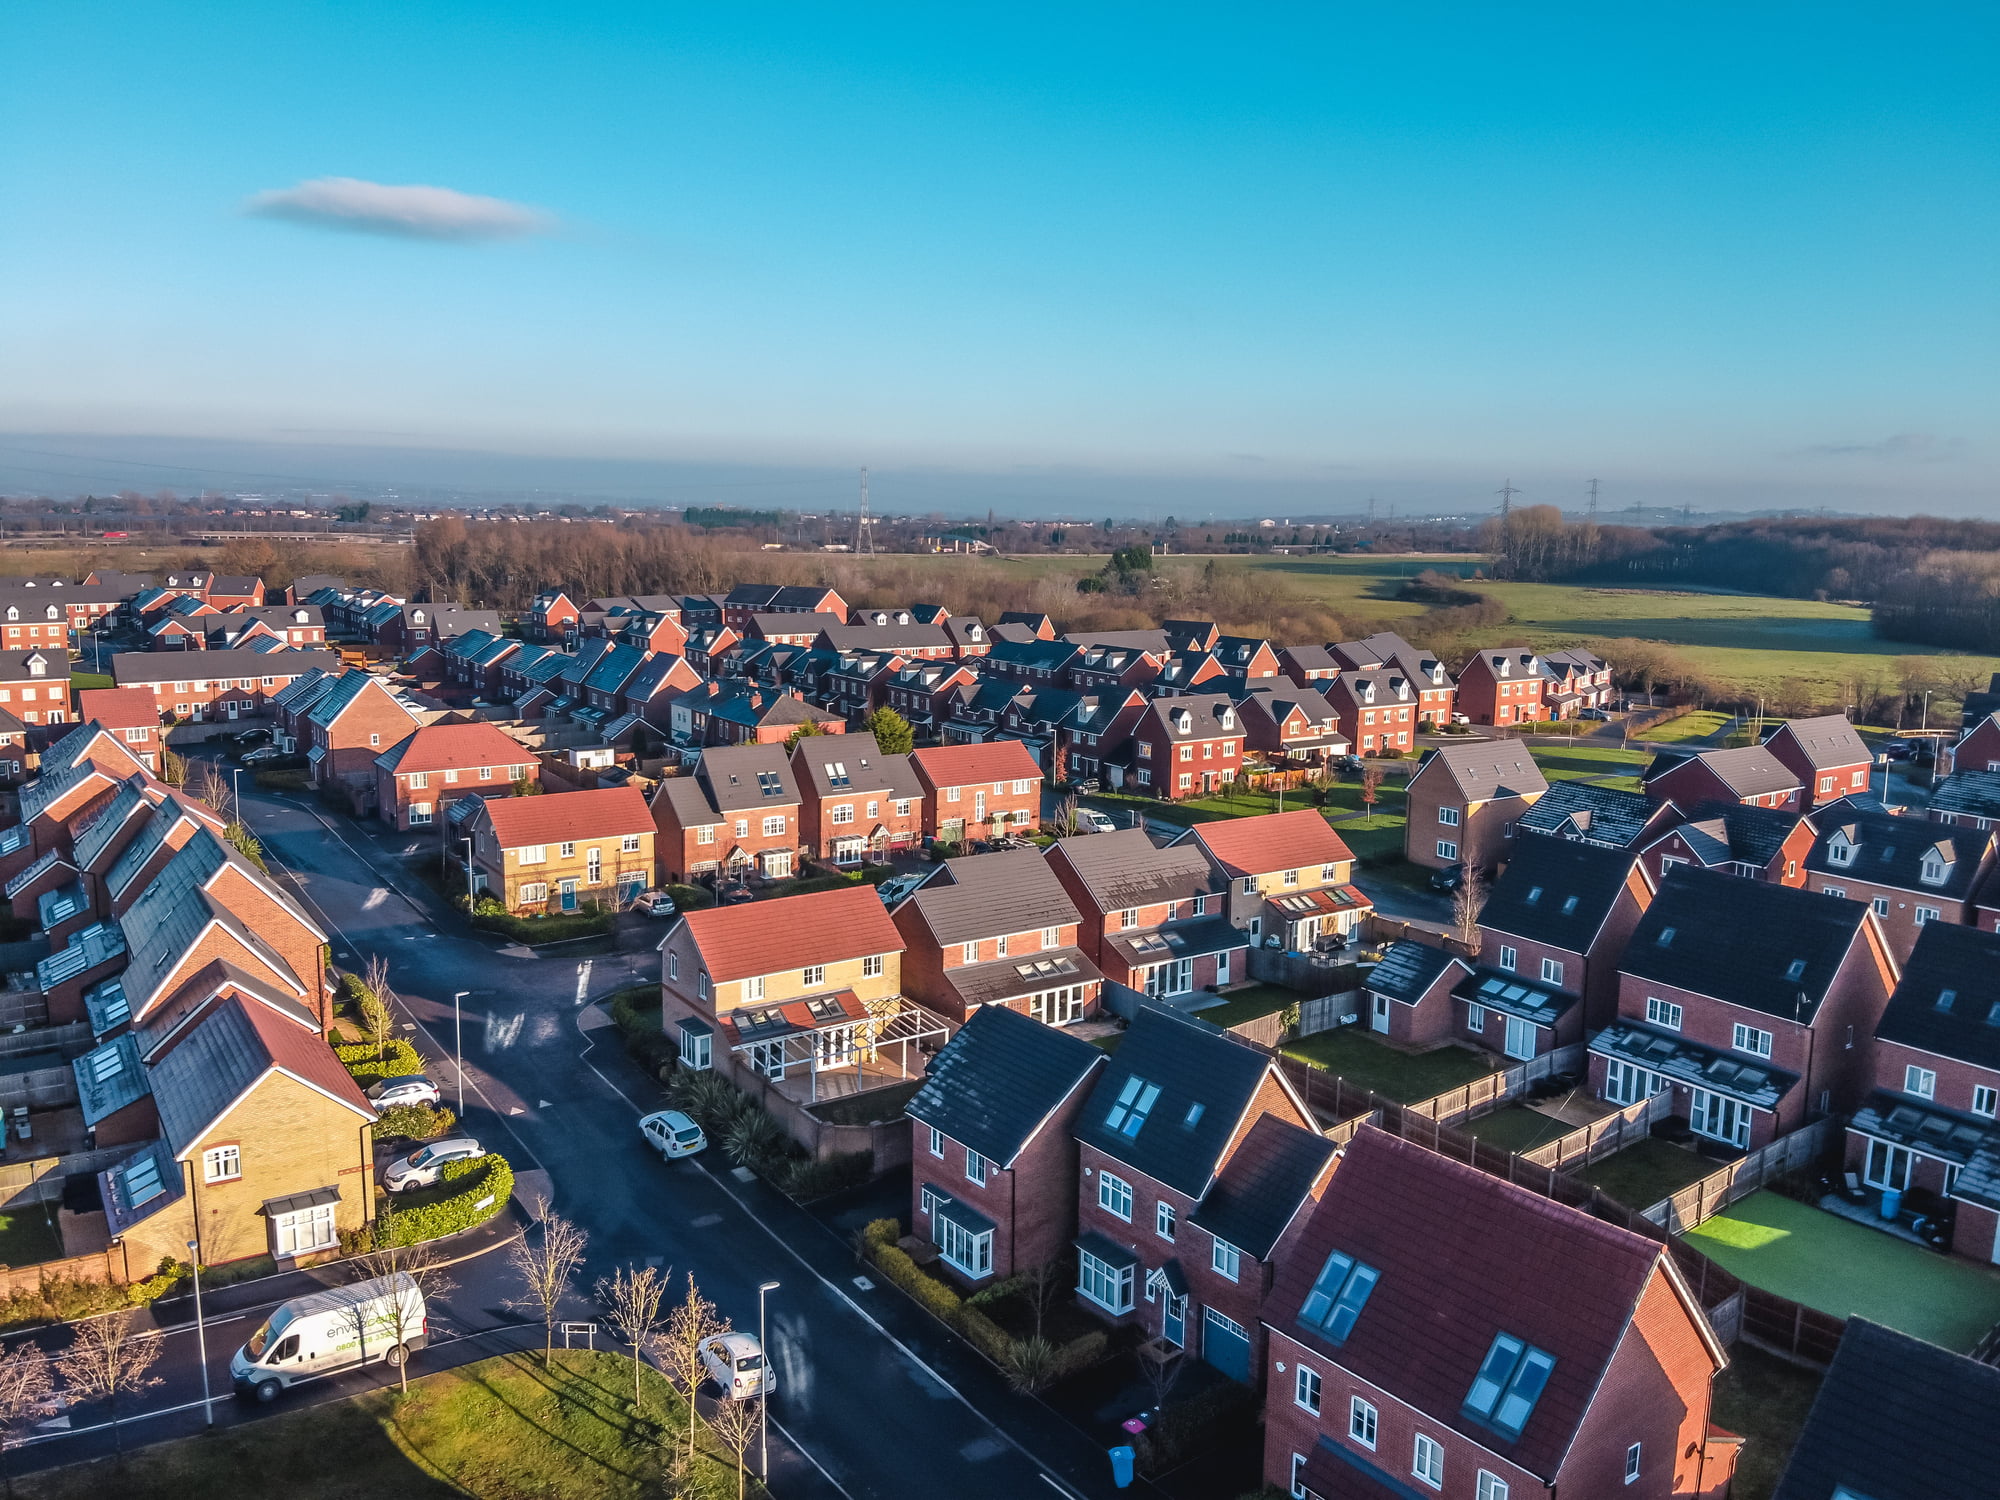 Aerial view of rows of houses under a blue sky